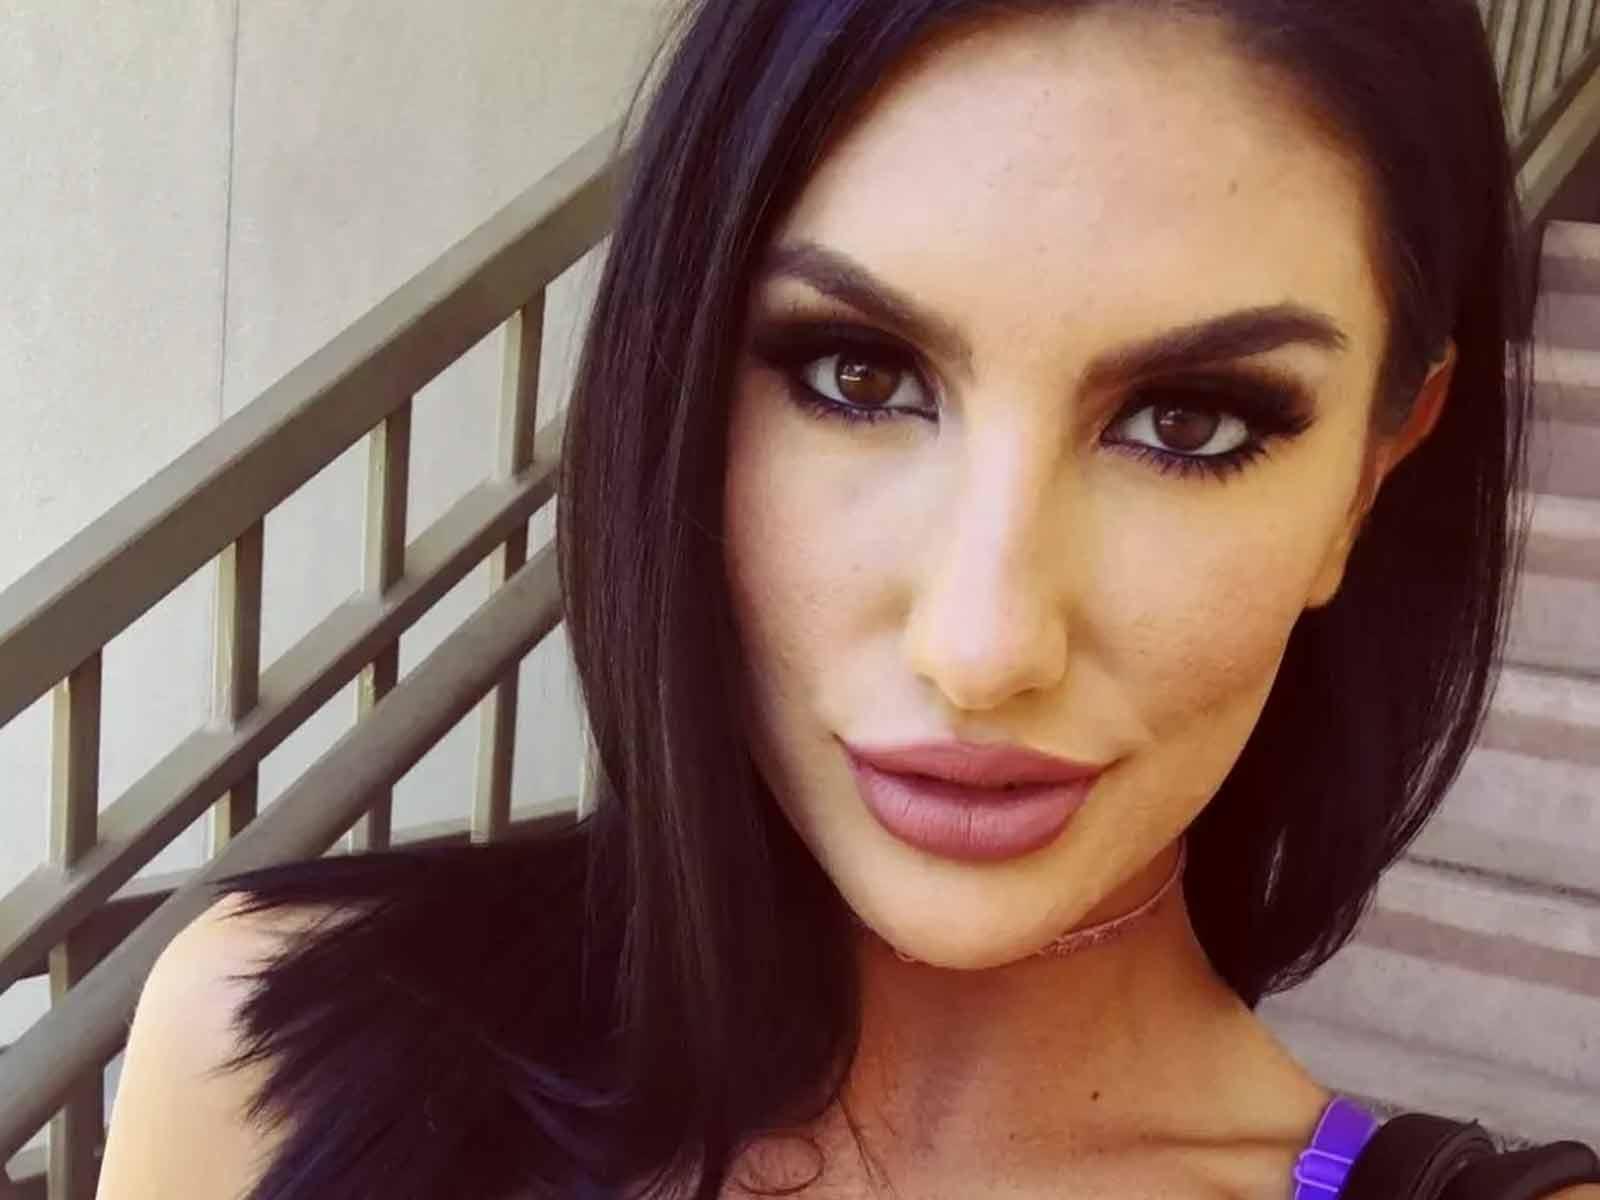 Pornstar August Ames Apologized to Family In Suicide Note, Did Not Mention Cyberbullying